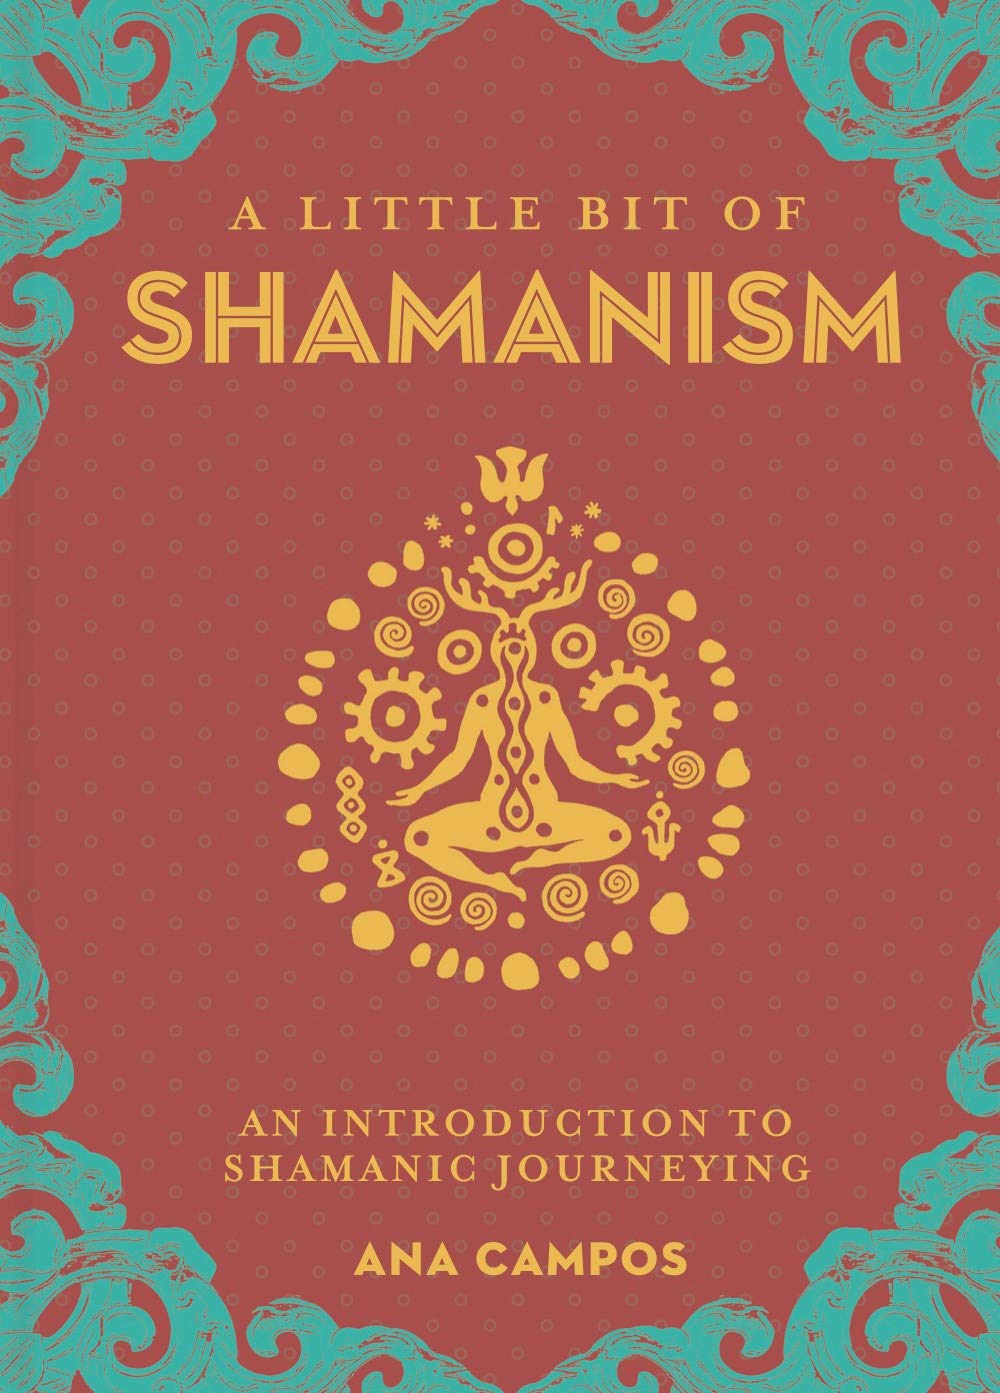 A Little Bit of Shamanism by Ana Campos